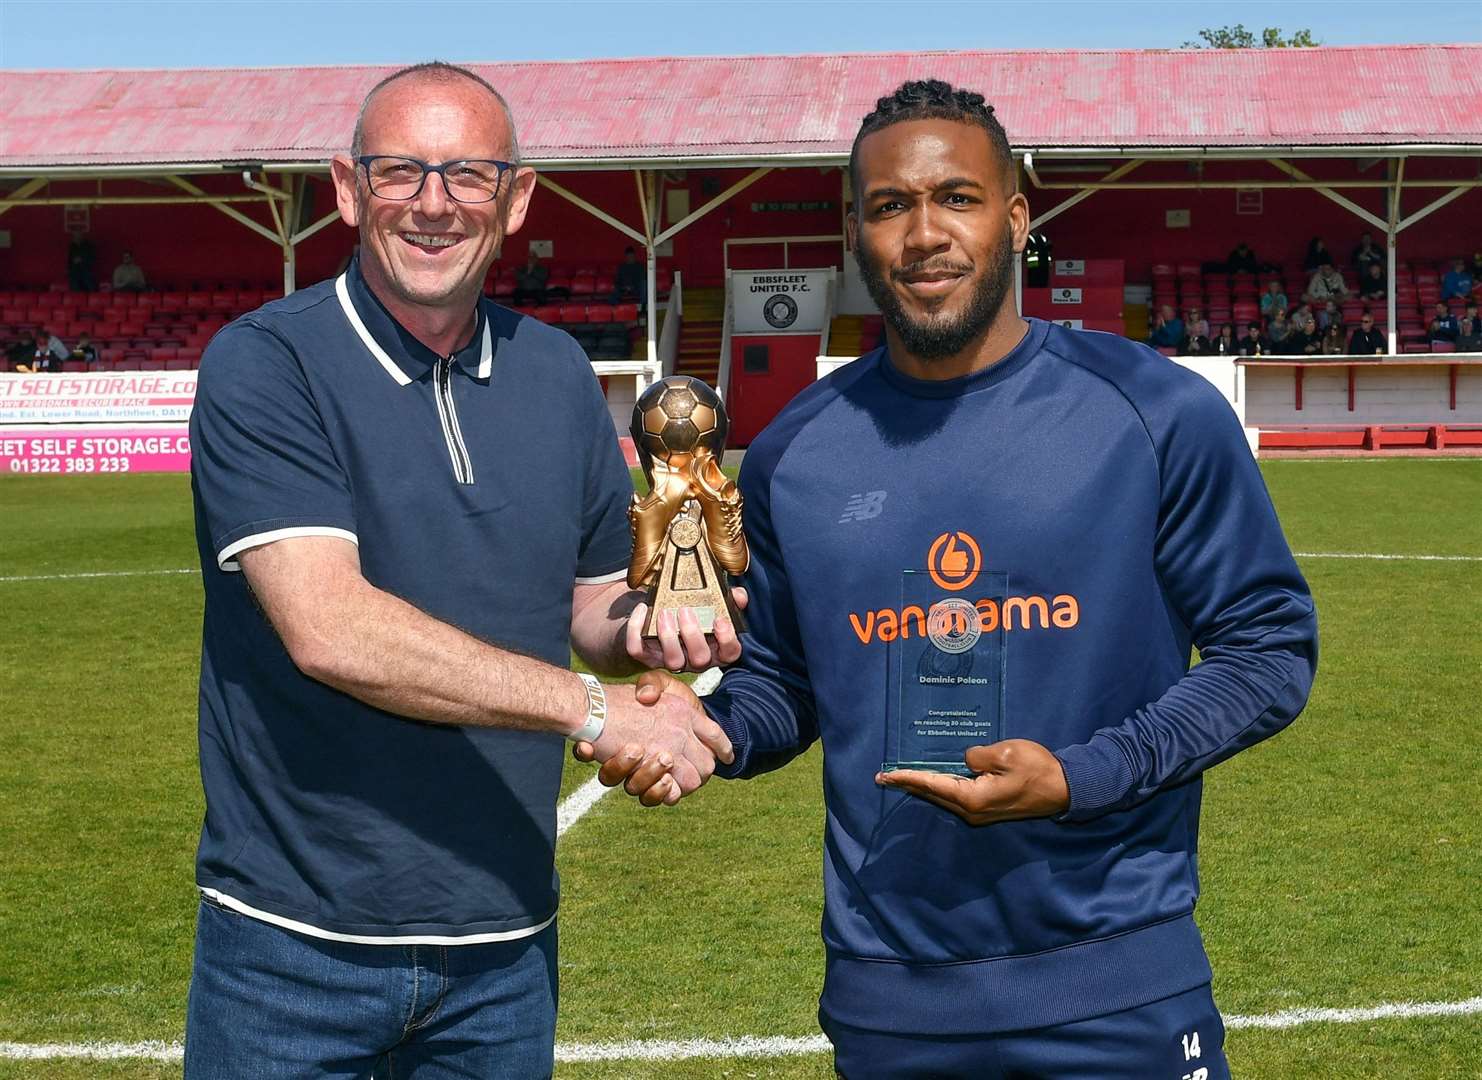 All-time Fleet record scorer Steve Portway presents 2022/23 top scorer Dominic Poleon with his golden boot - as well as an award for reaching 50 club goals. Picture: Dave Plumb/Ebbsfleet United FC